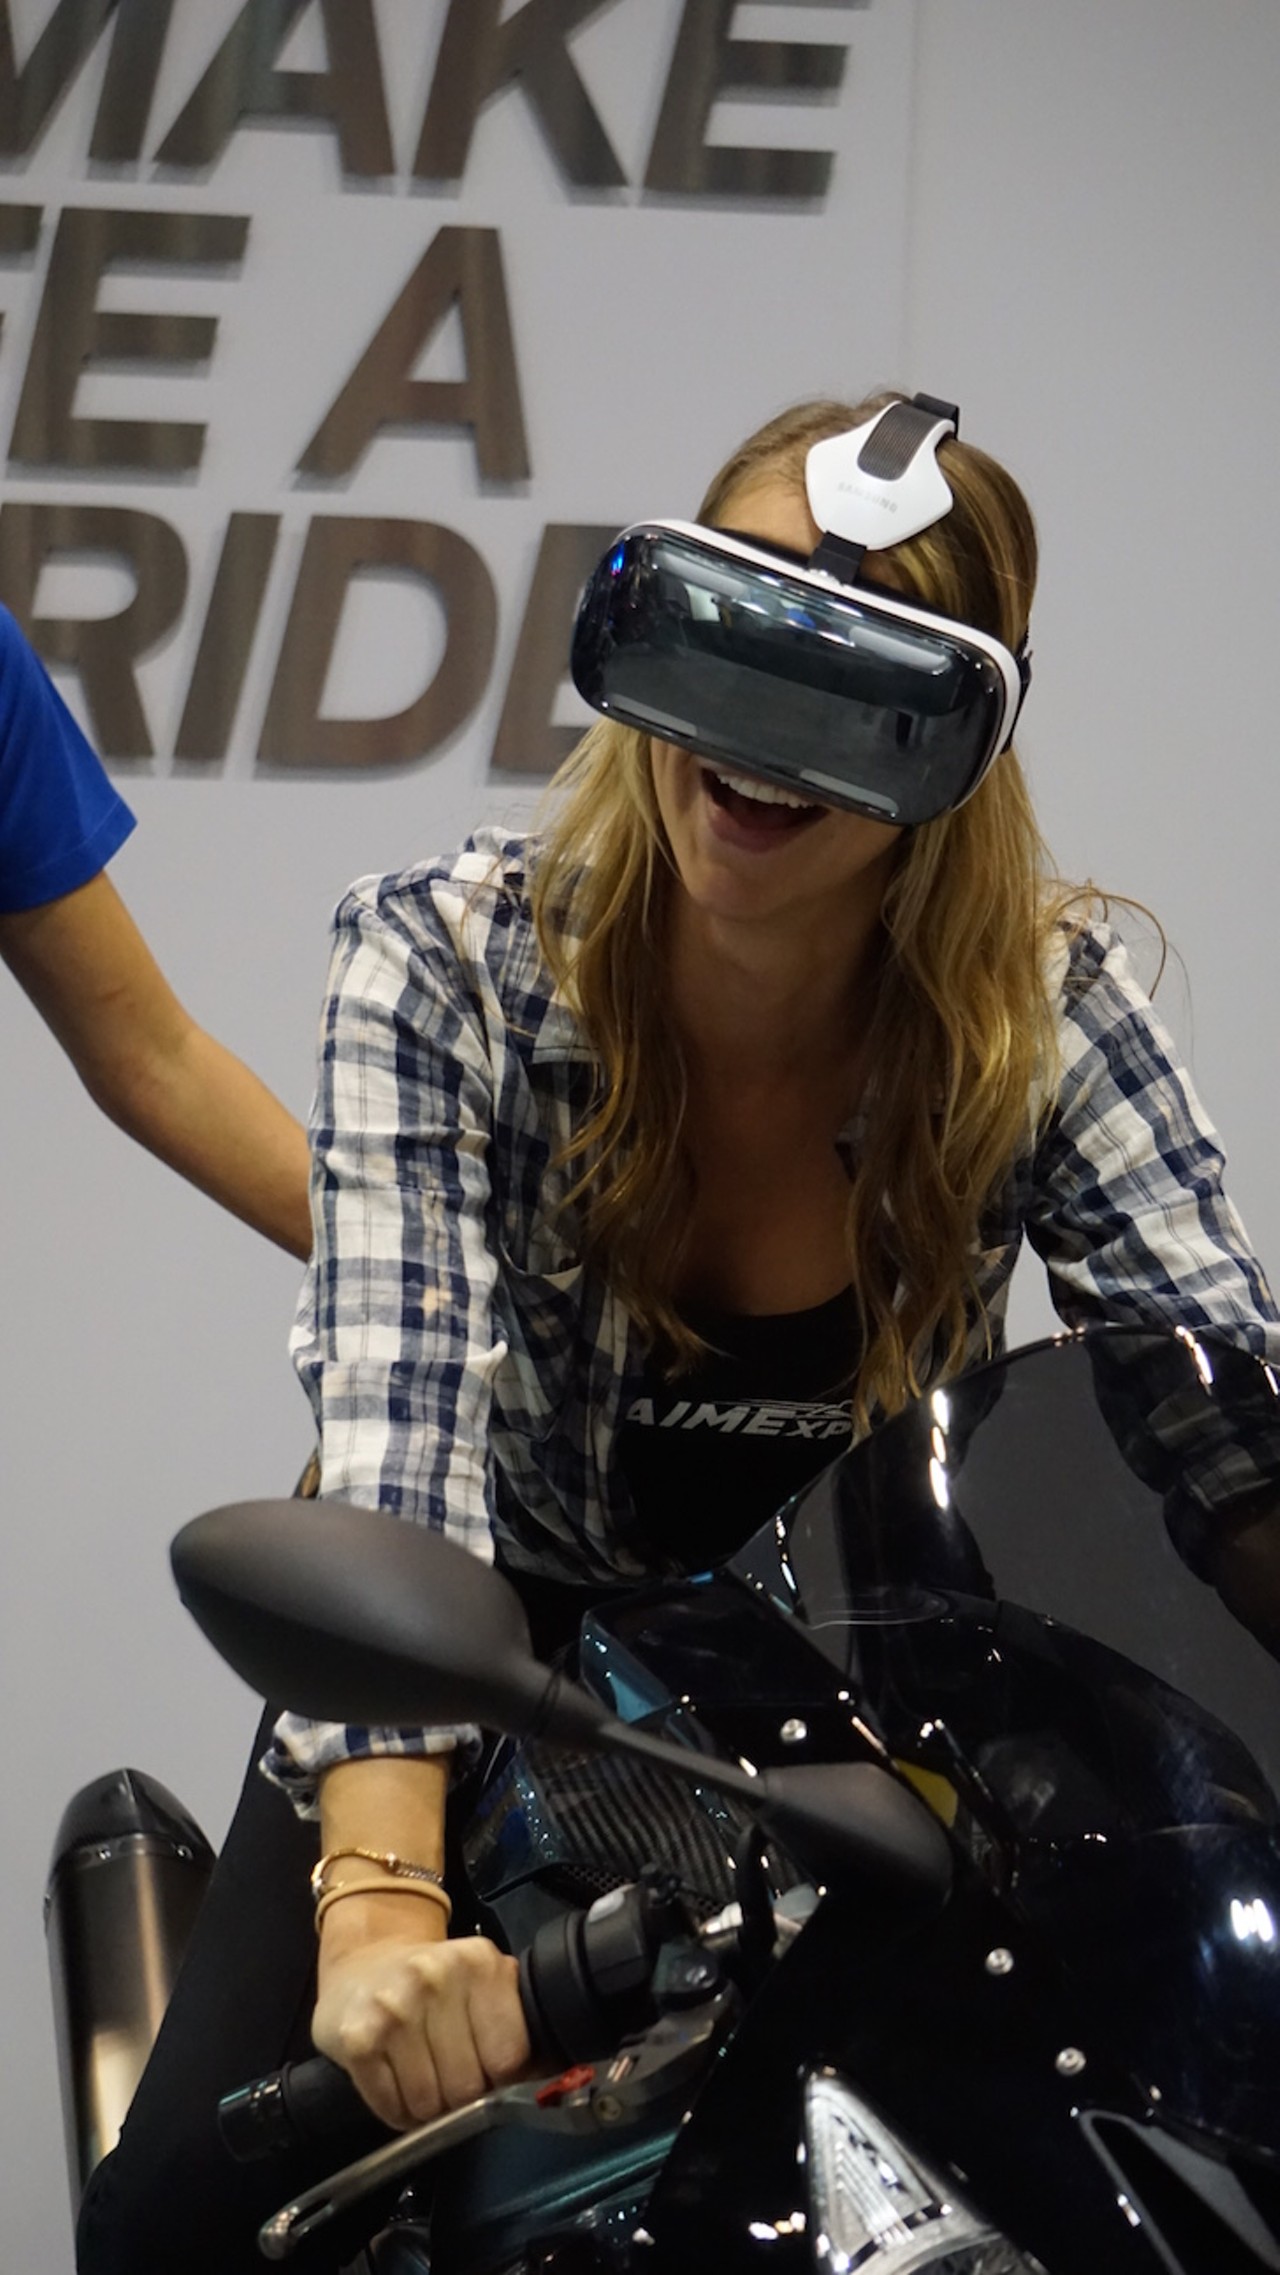 15 photos of what to expect at the Orlando AIMExpo